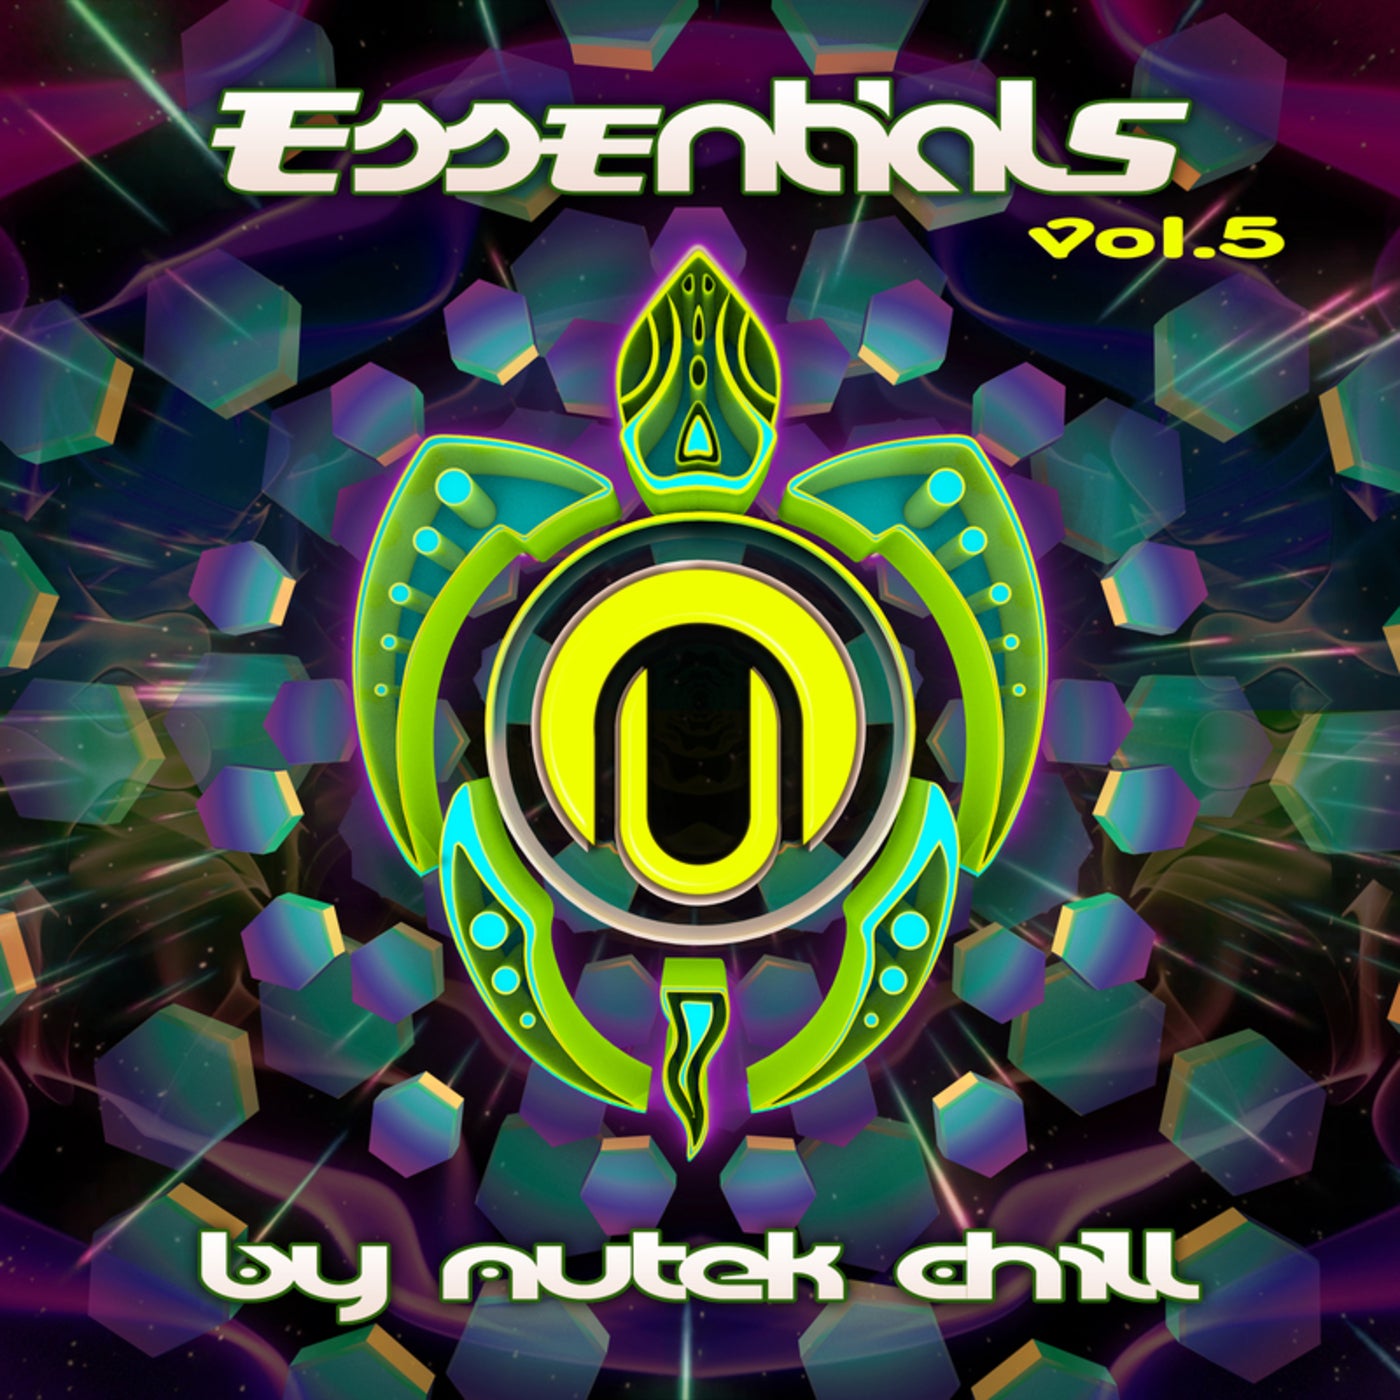 Essentials vol.5 Compiled by Nutek Chill